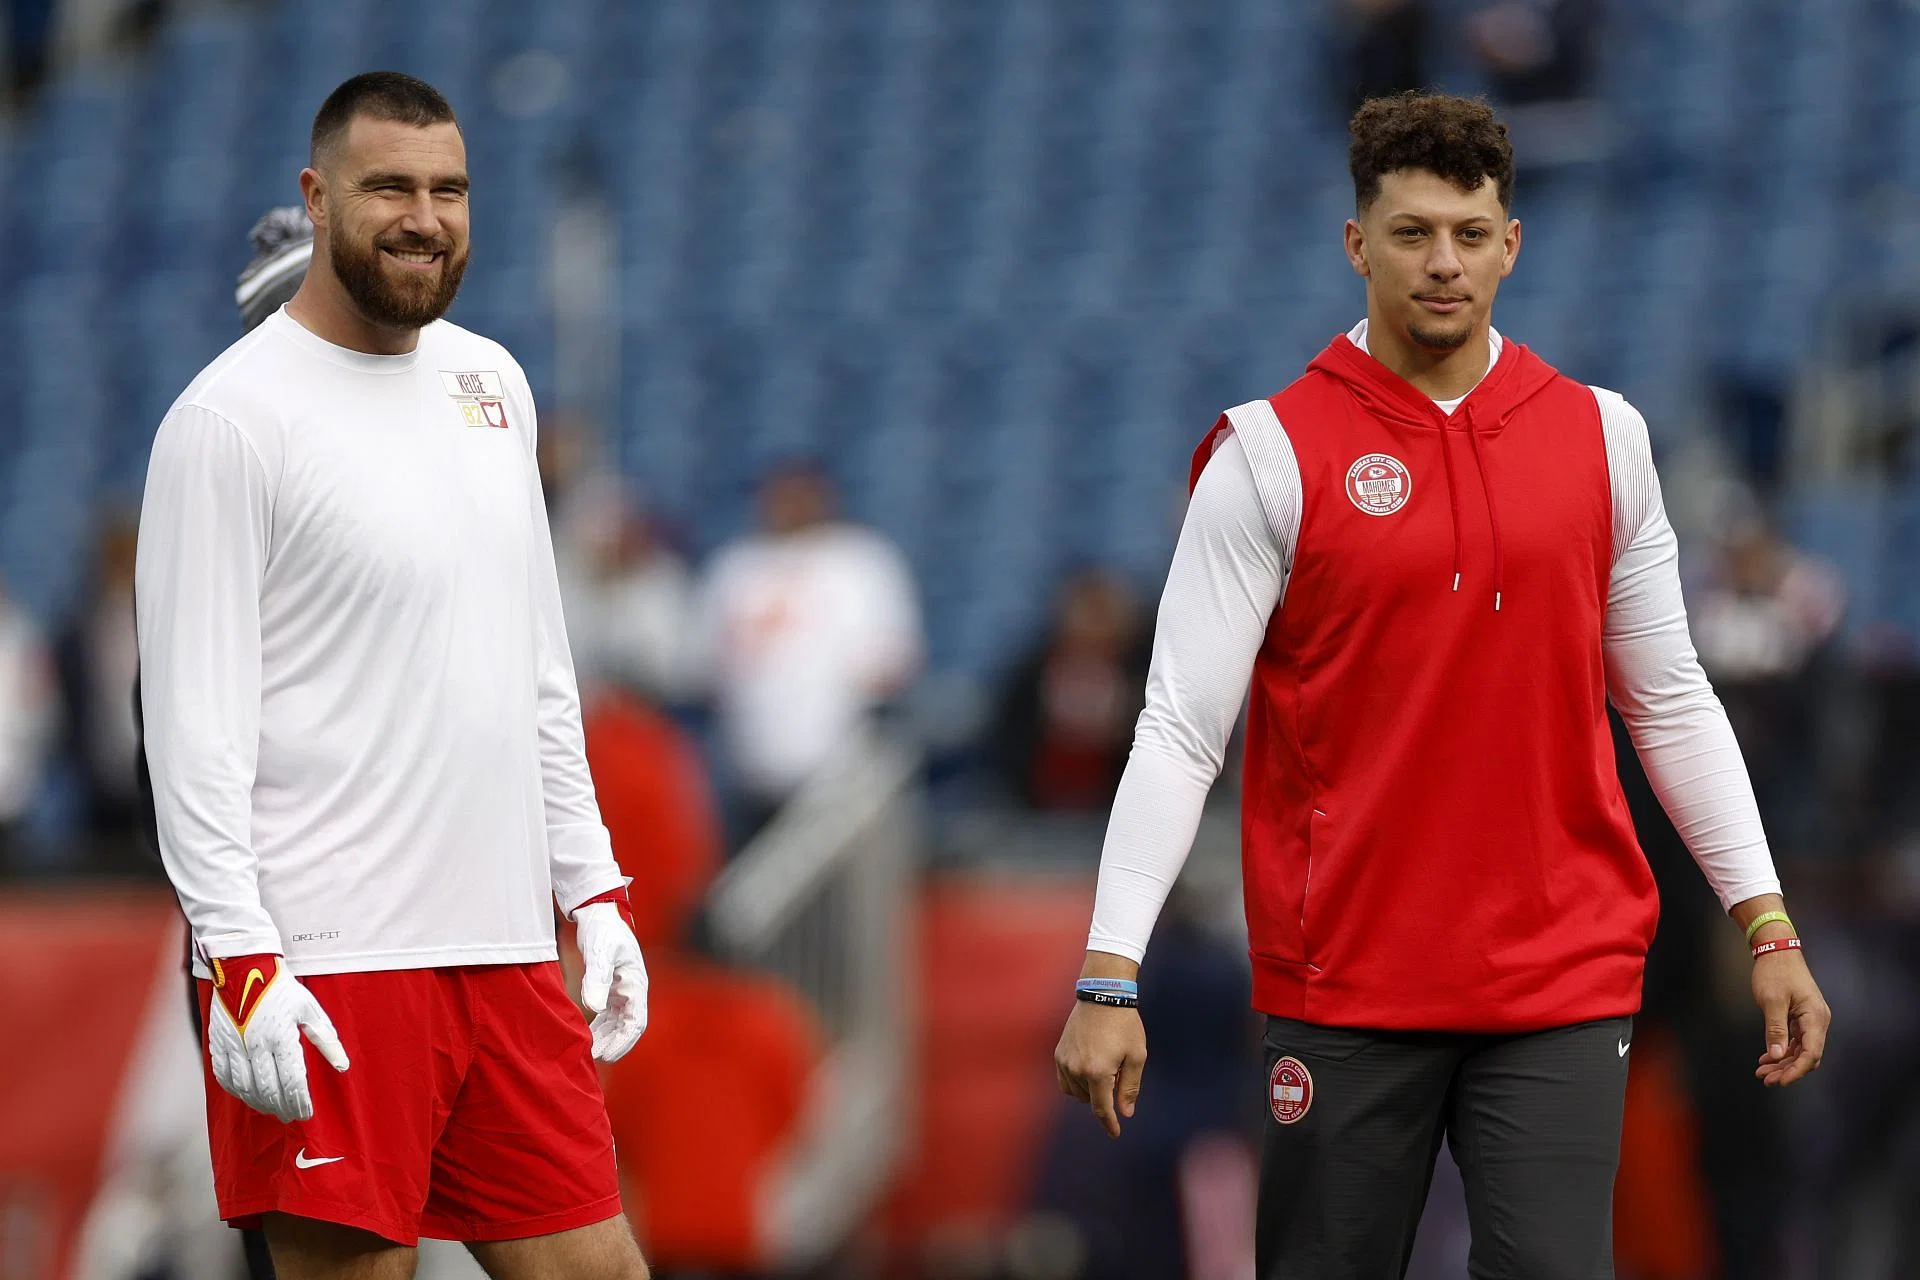 A Night of Laughs and Generosity Patrick Mahomes and Travis Kelce Raise Millions for Children's Hospital